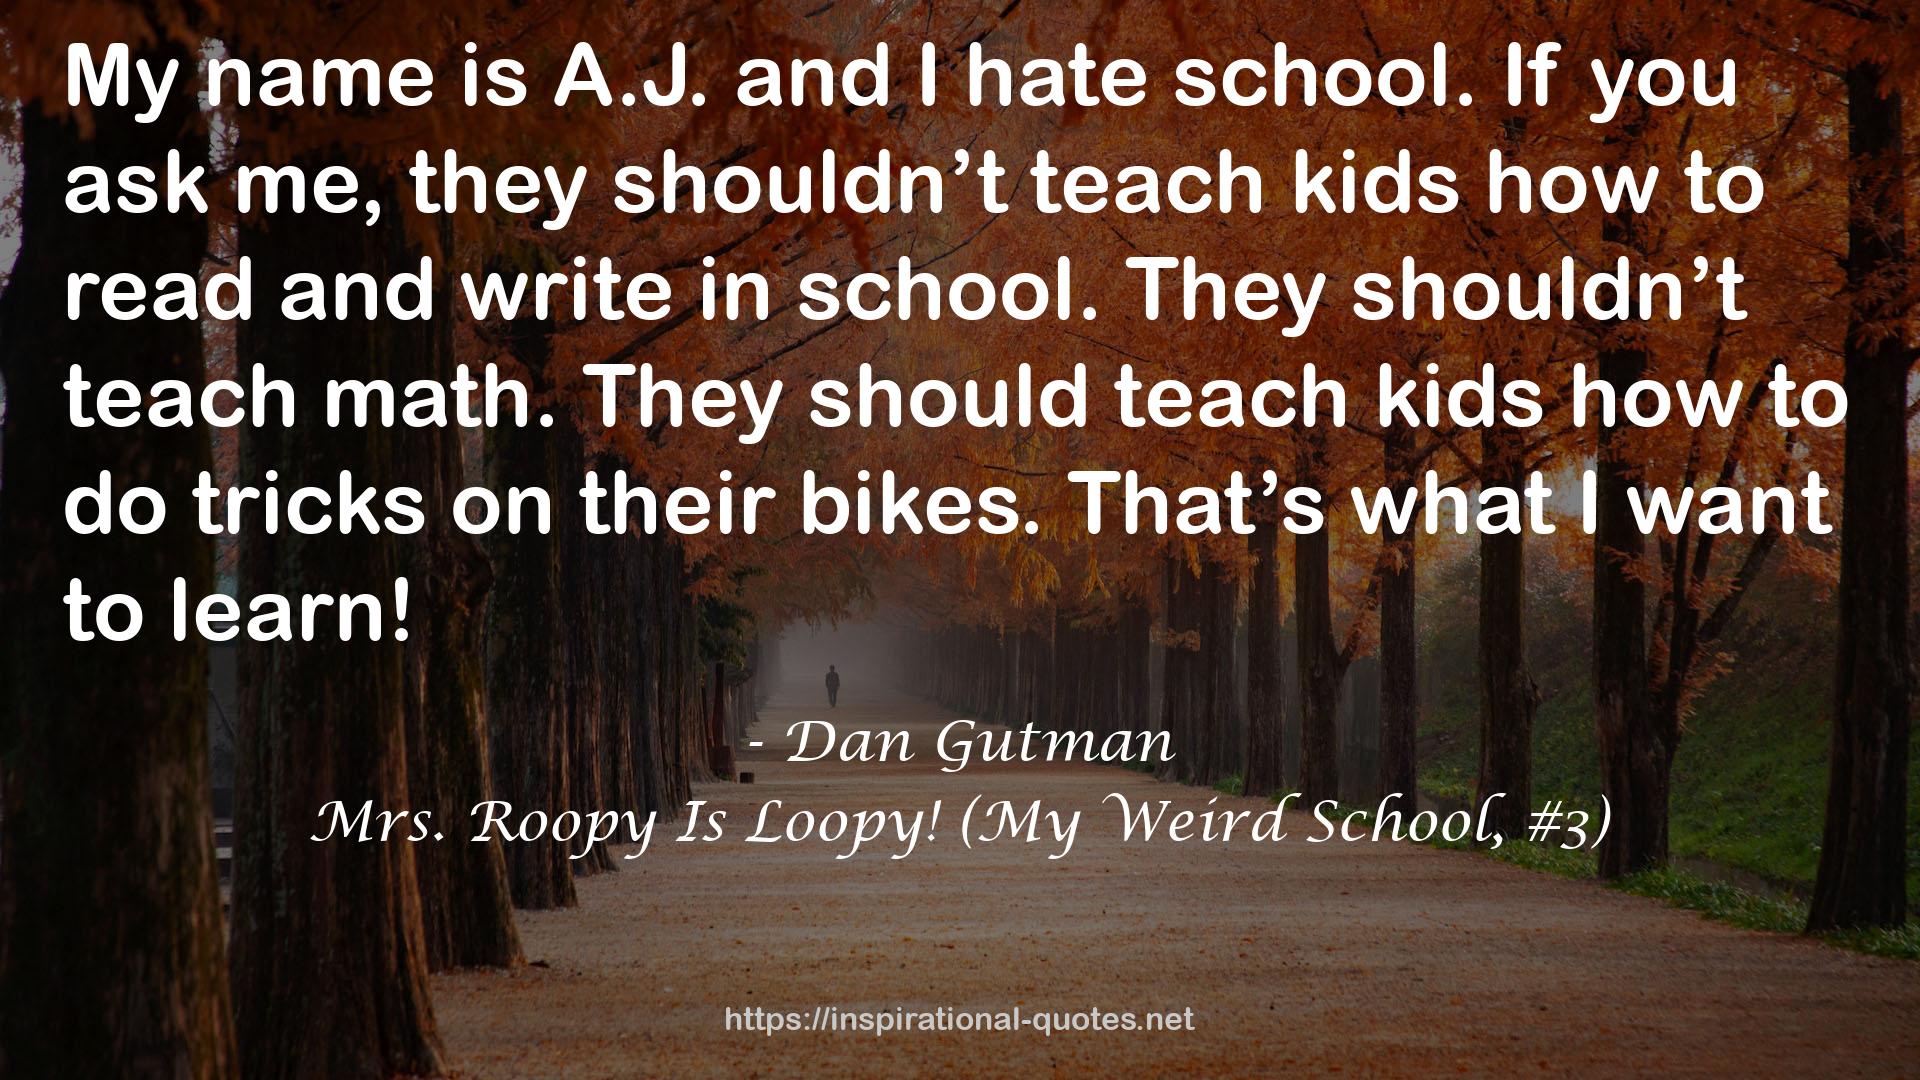 Mrs. Roopy Is Loopy! (My Weird School, #3) QUOTES